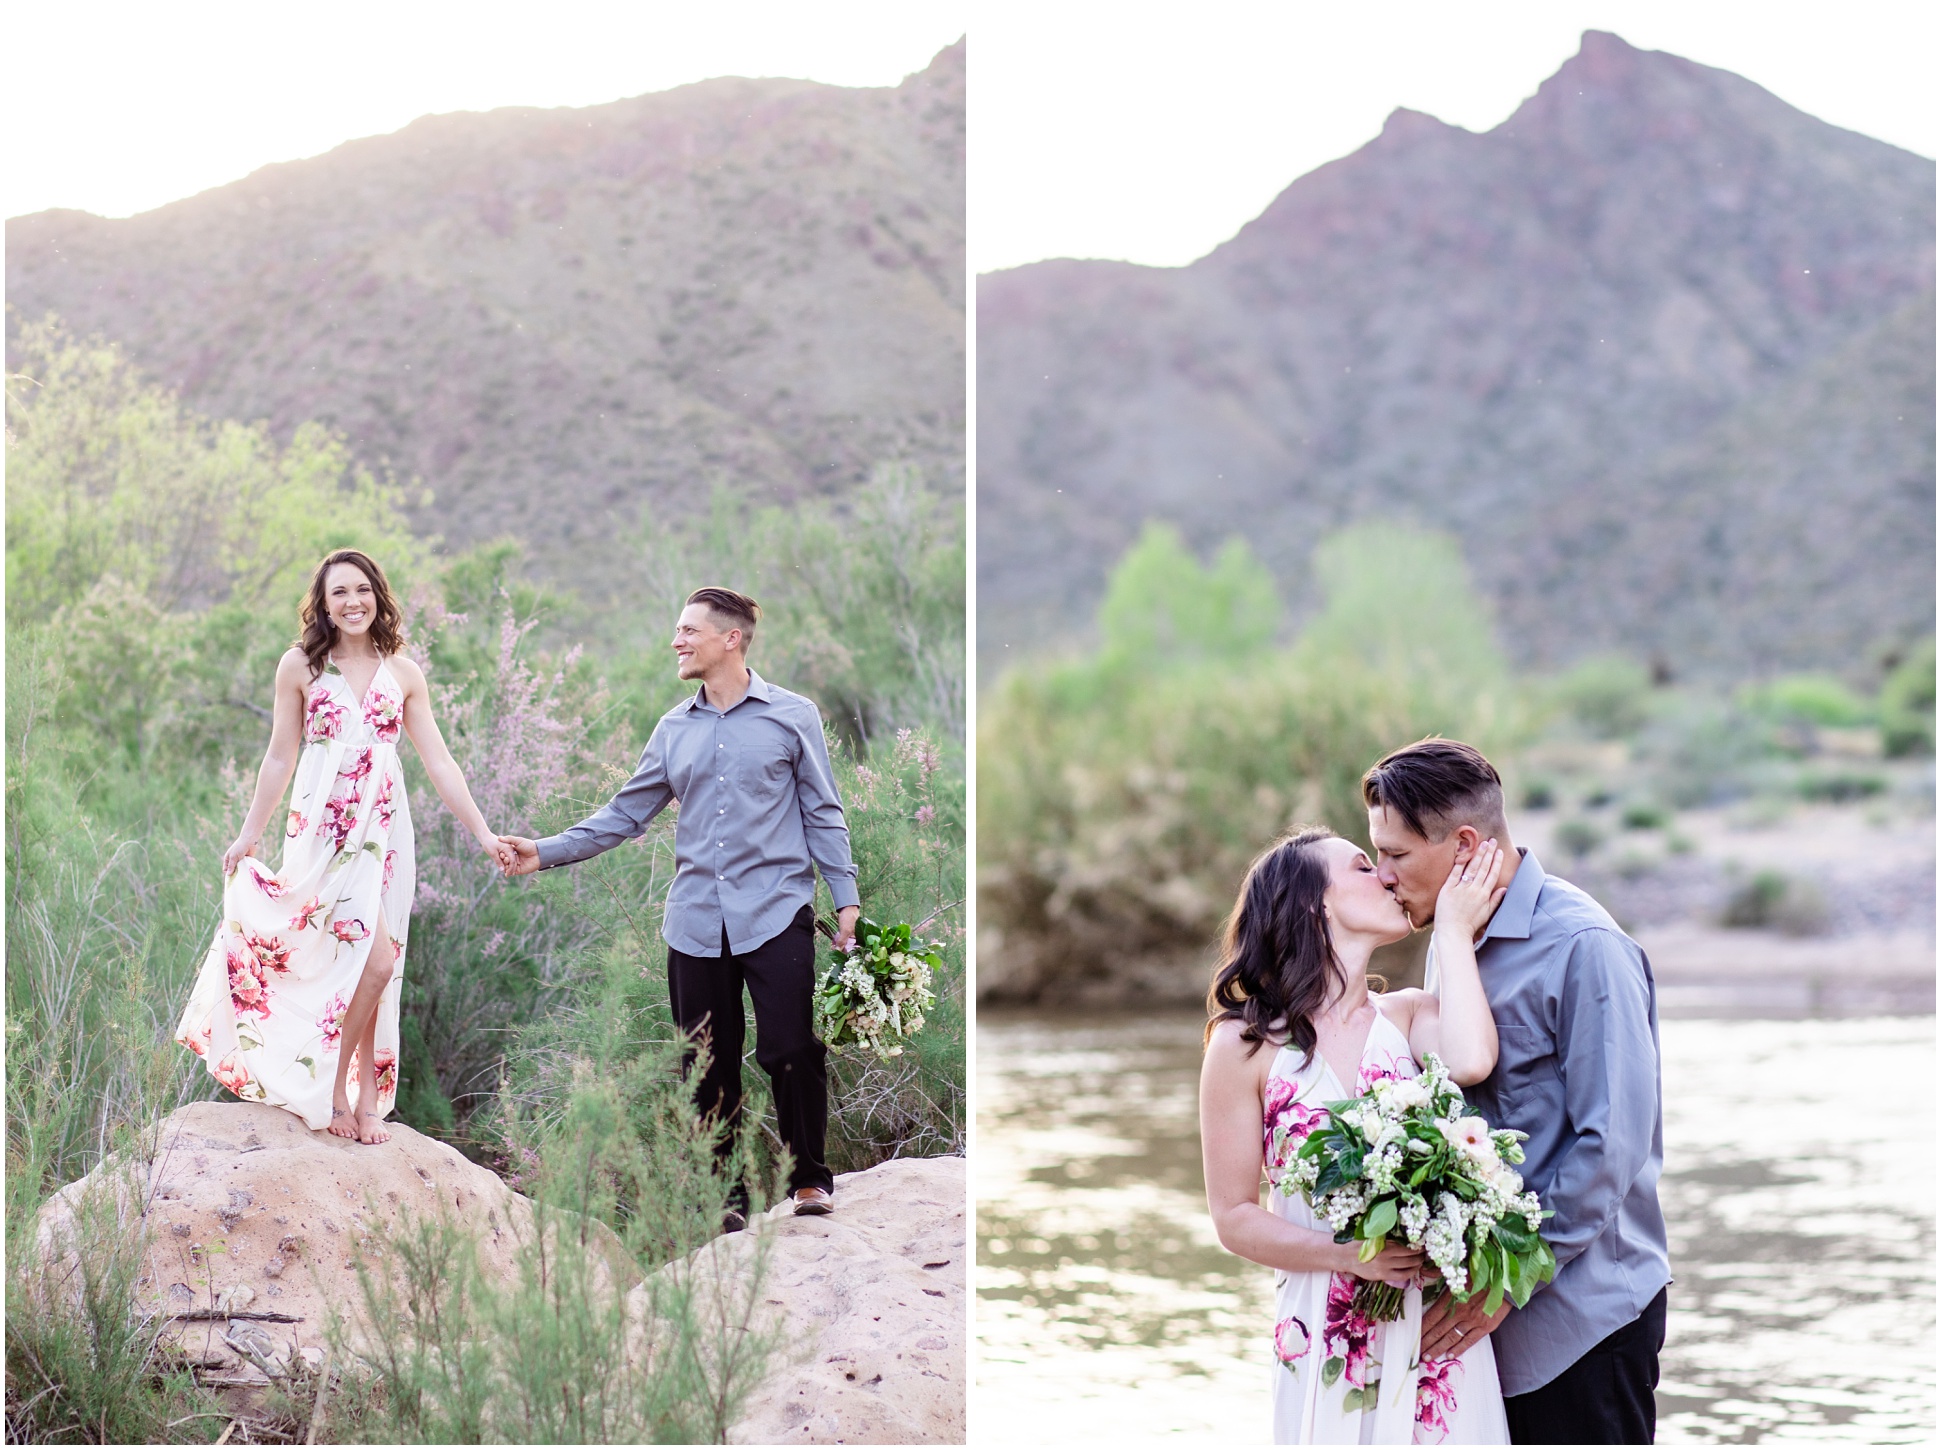 Two Images of Jessica and MIchael at Salt River in Arizona.